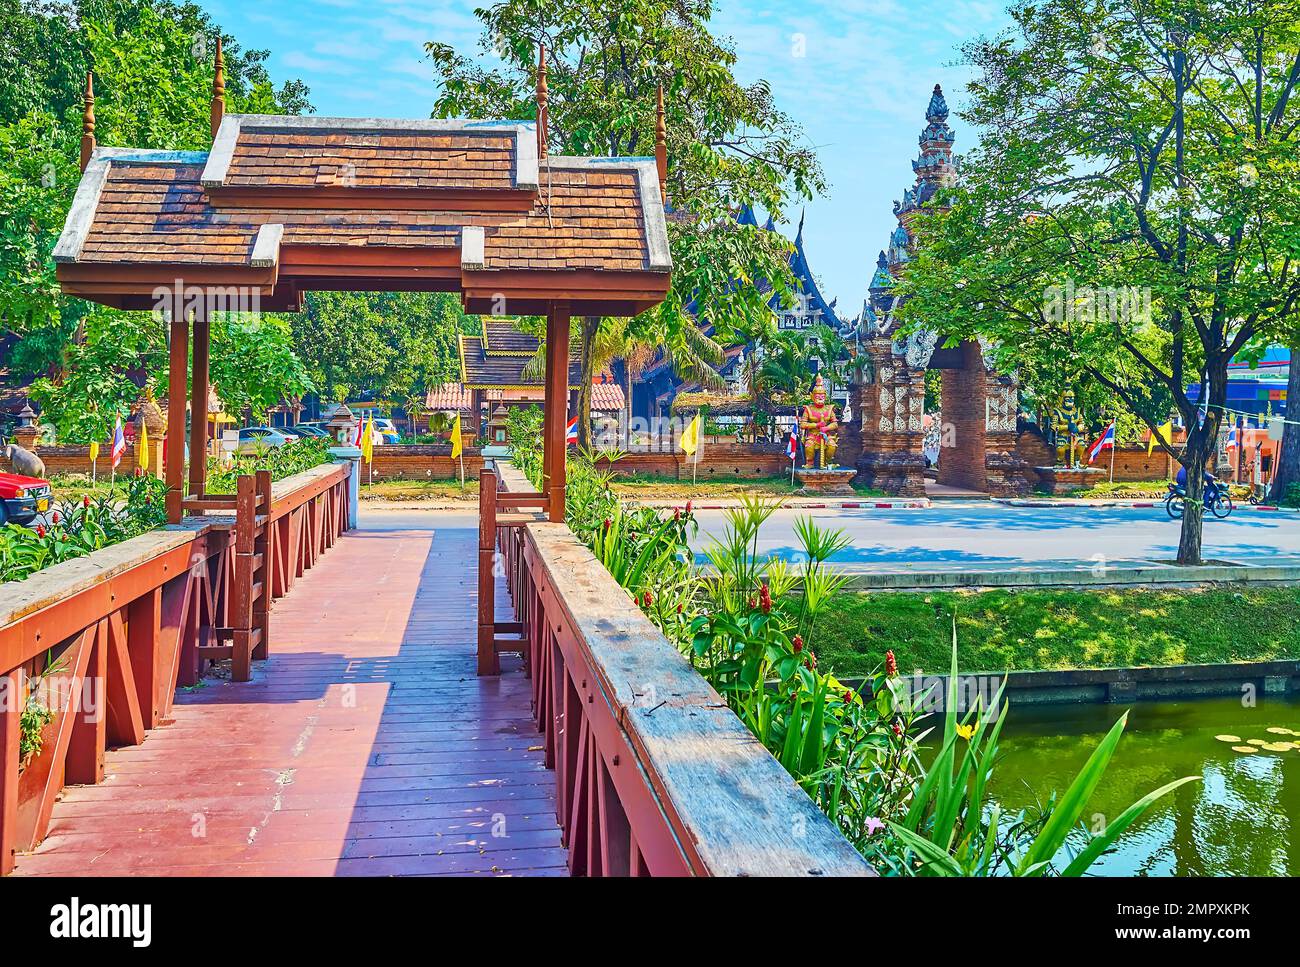 Decorative gate on a footbridge across Old City Moat with a view on shady trees and Wat Lok Moli in the background, Chiang Mai, Thailand Stock Photo